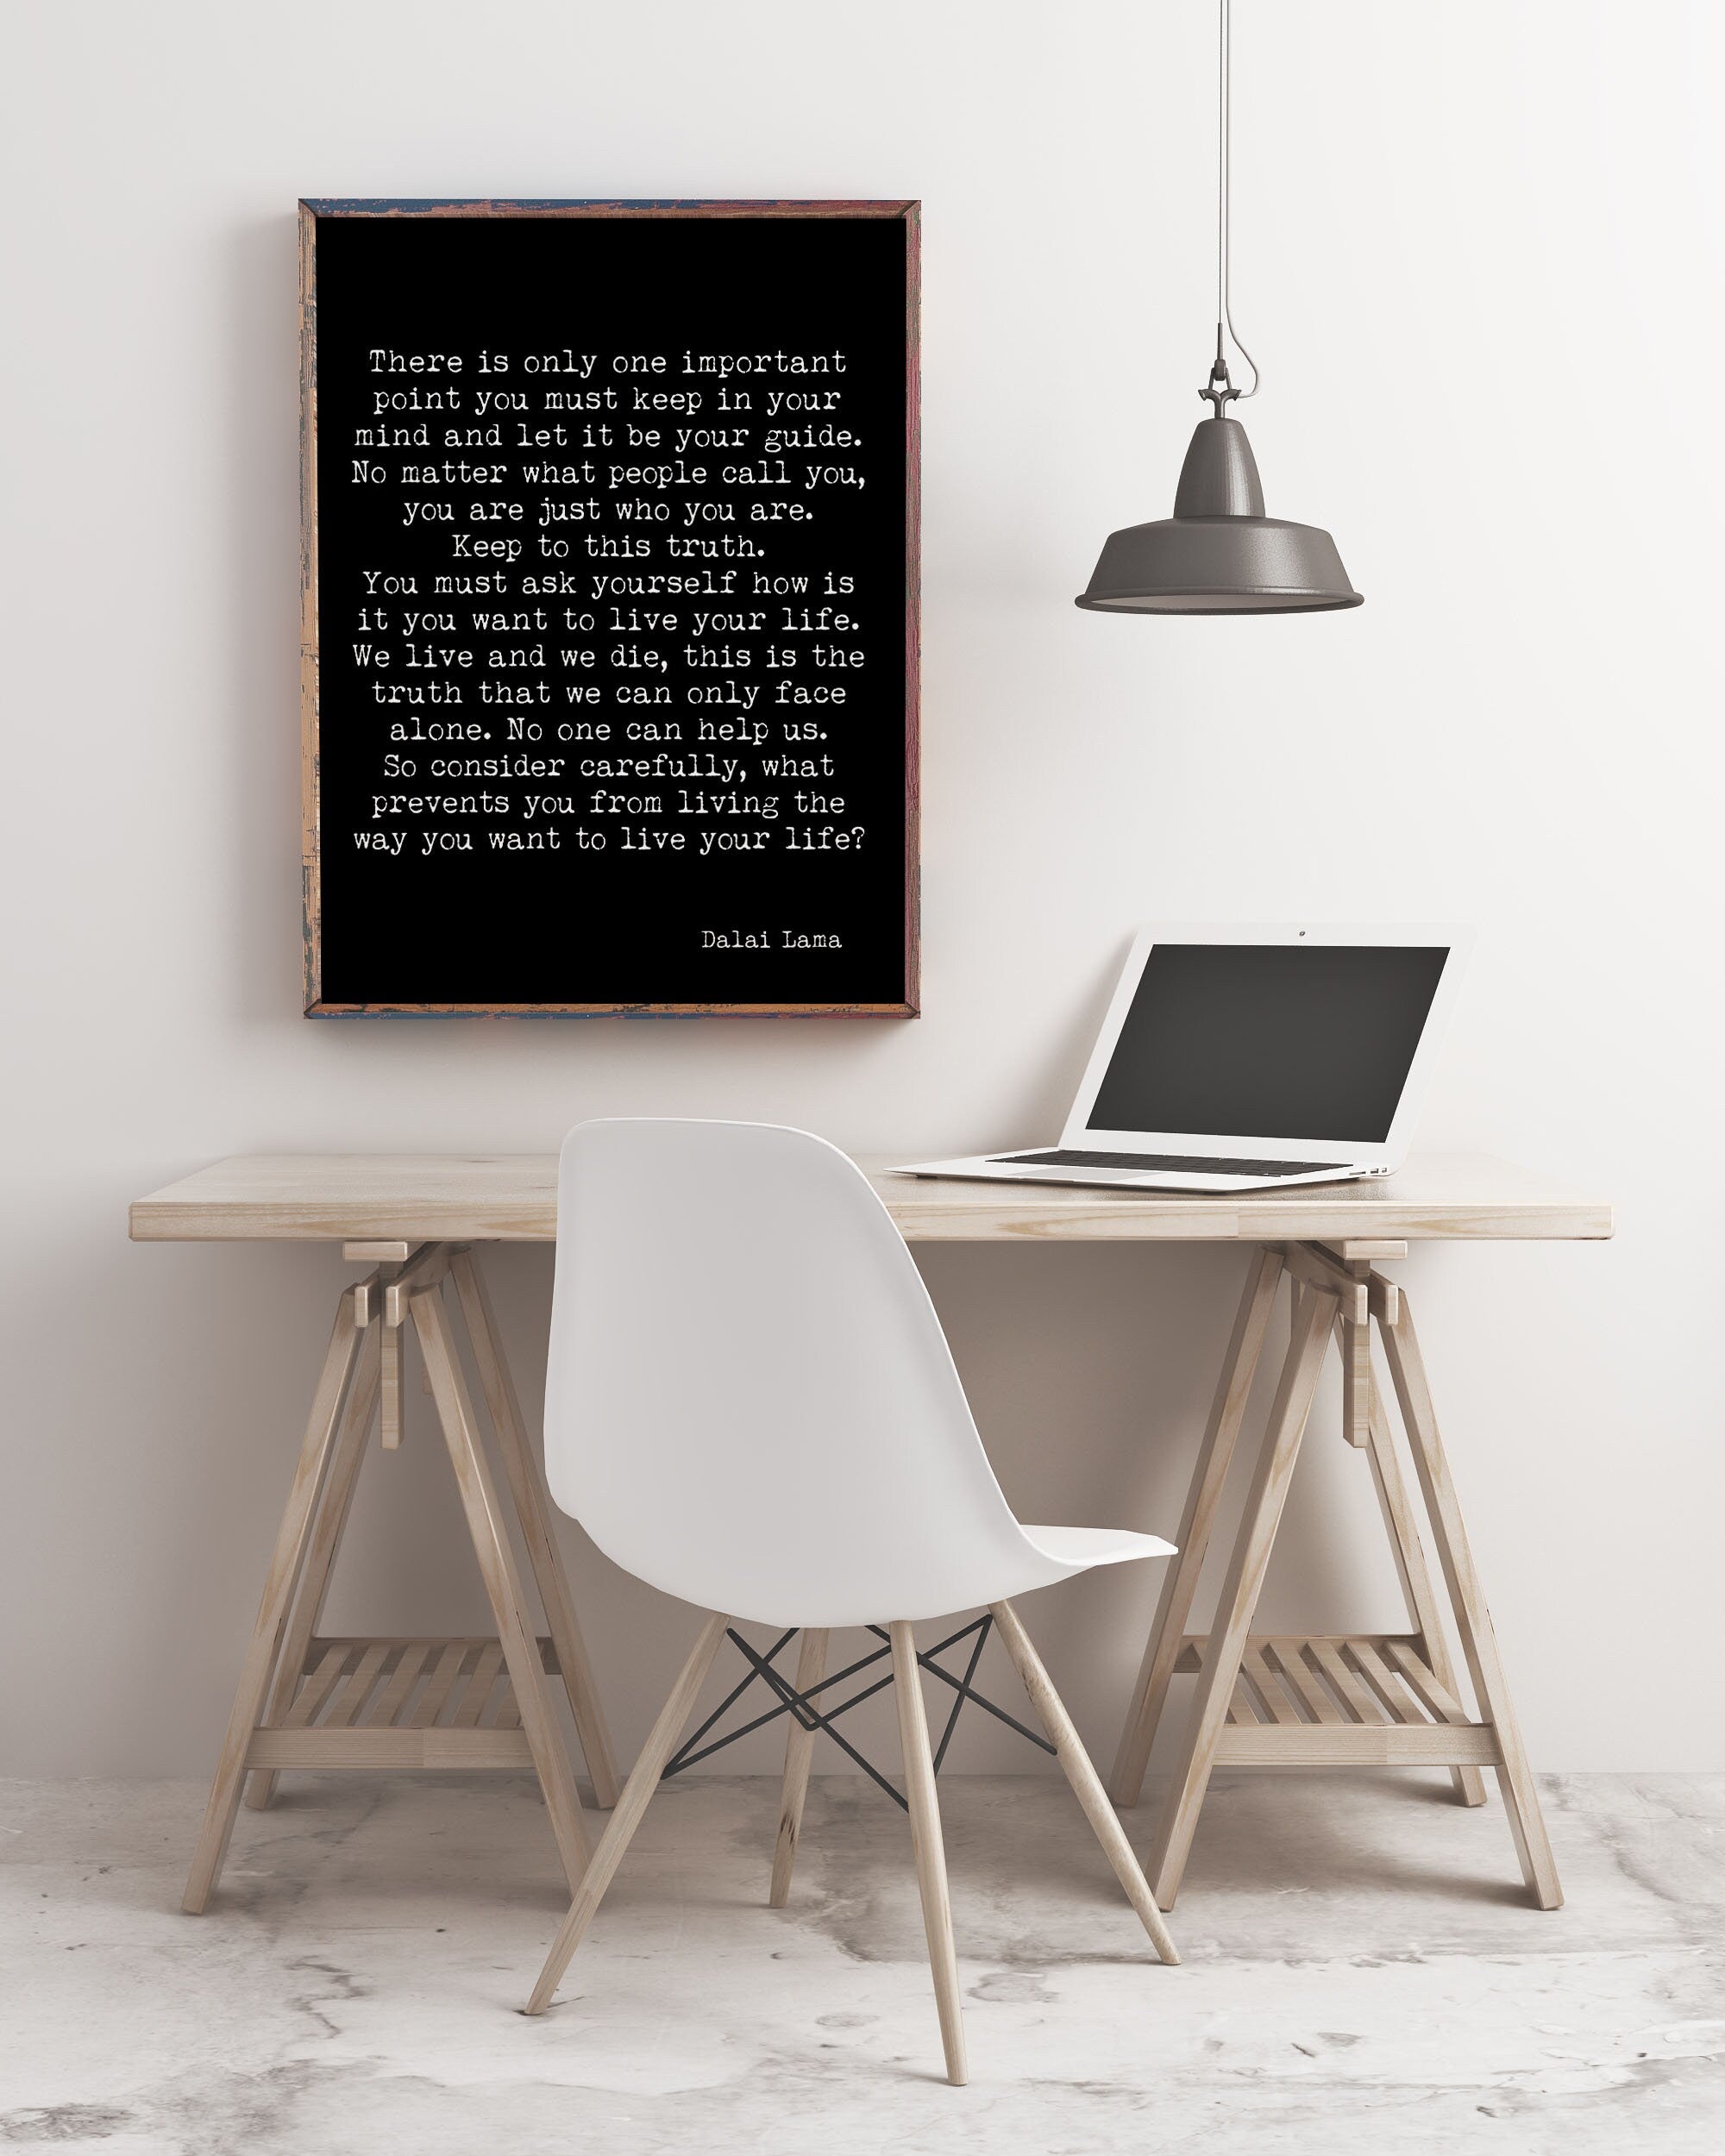 Dalai Lama Inspirational Unframed Quote Print in Black & White, What prevents you from living the way you want to live your life?